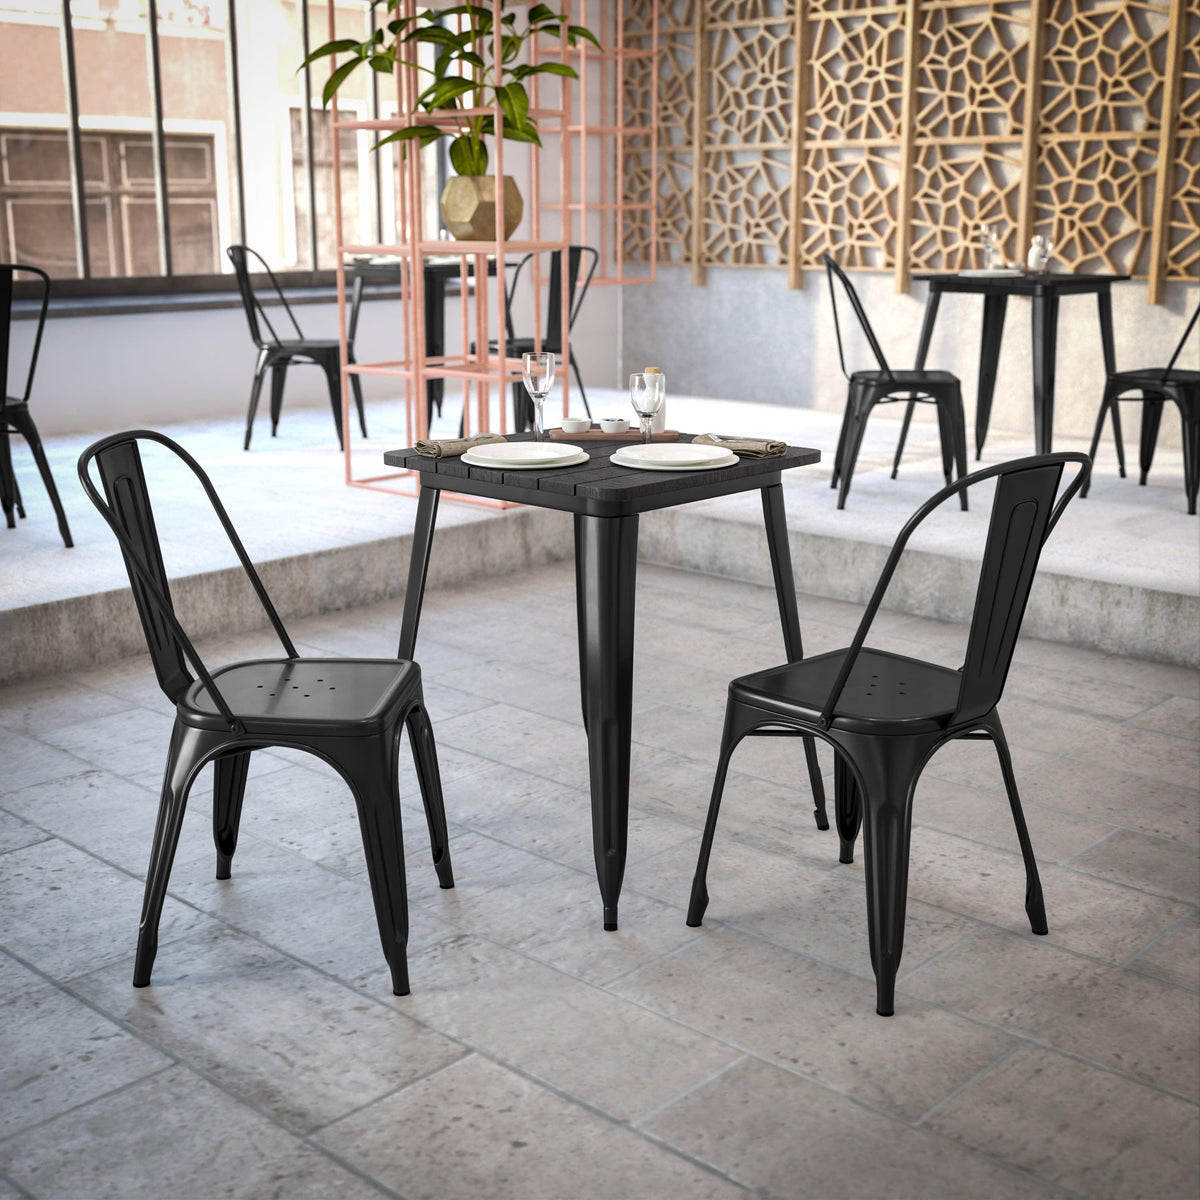 Black |#| 23.75inch SQ Commercial Poly Resin Restaurant Table with Steel Frame-Black/Black